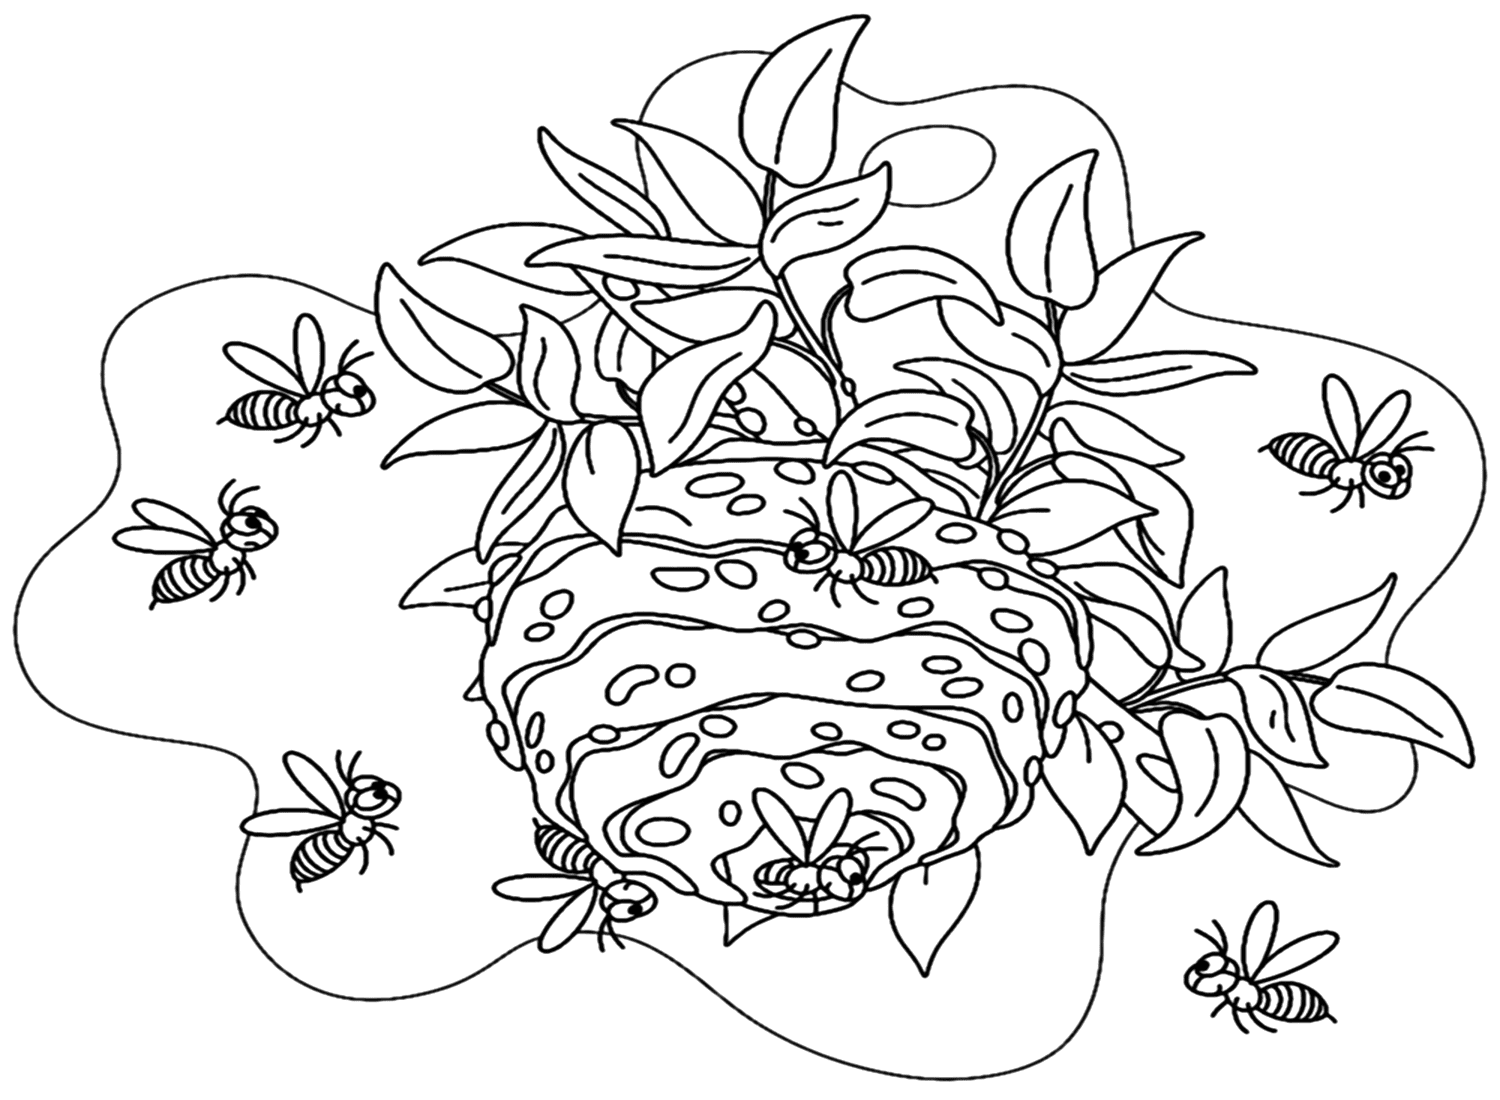 Nest Of Wasp Coloring Sheet from Wasp